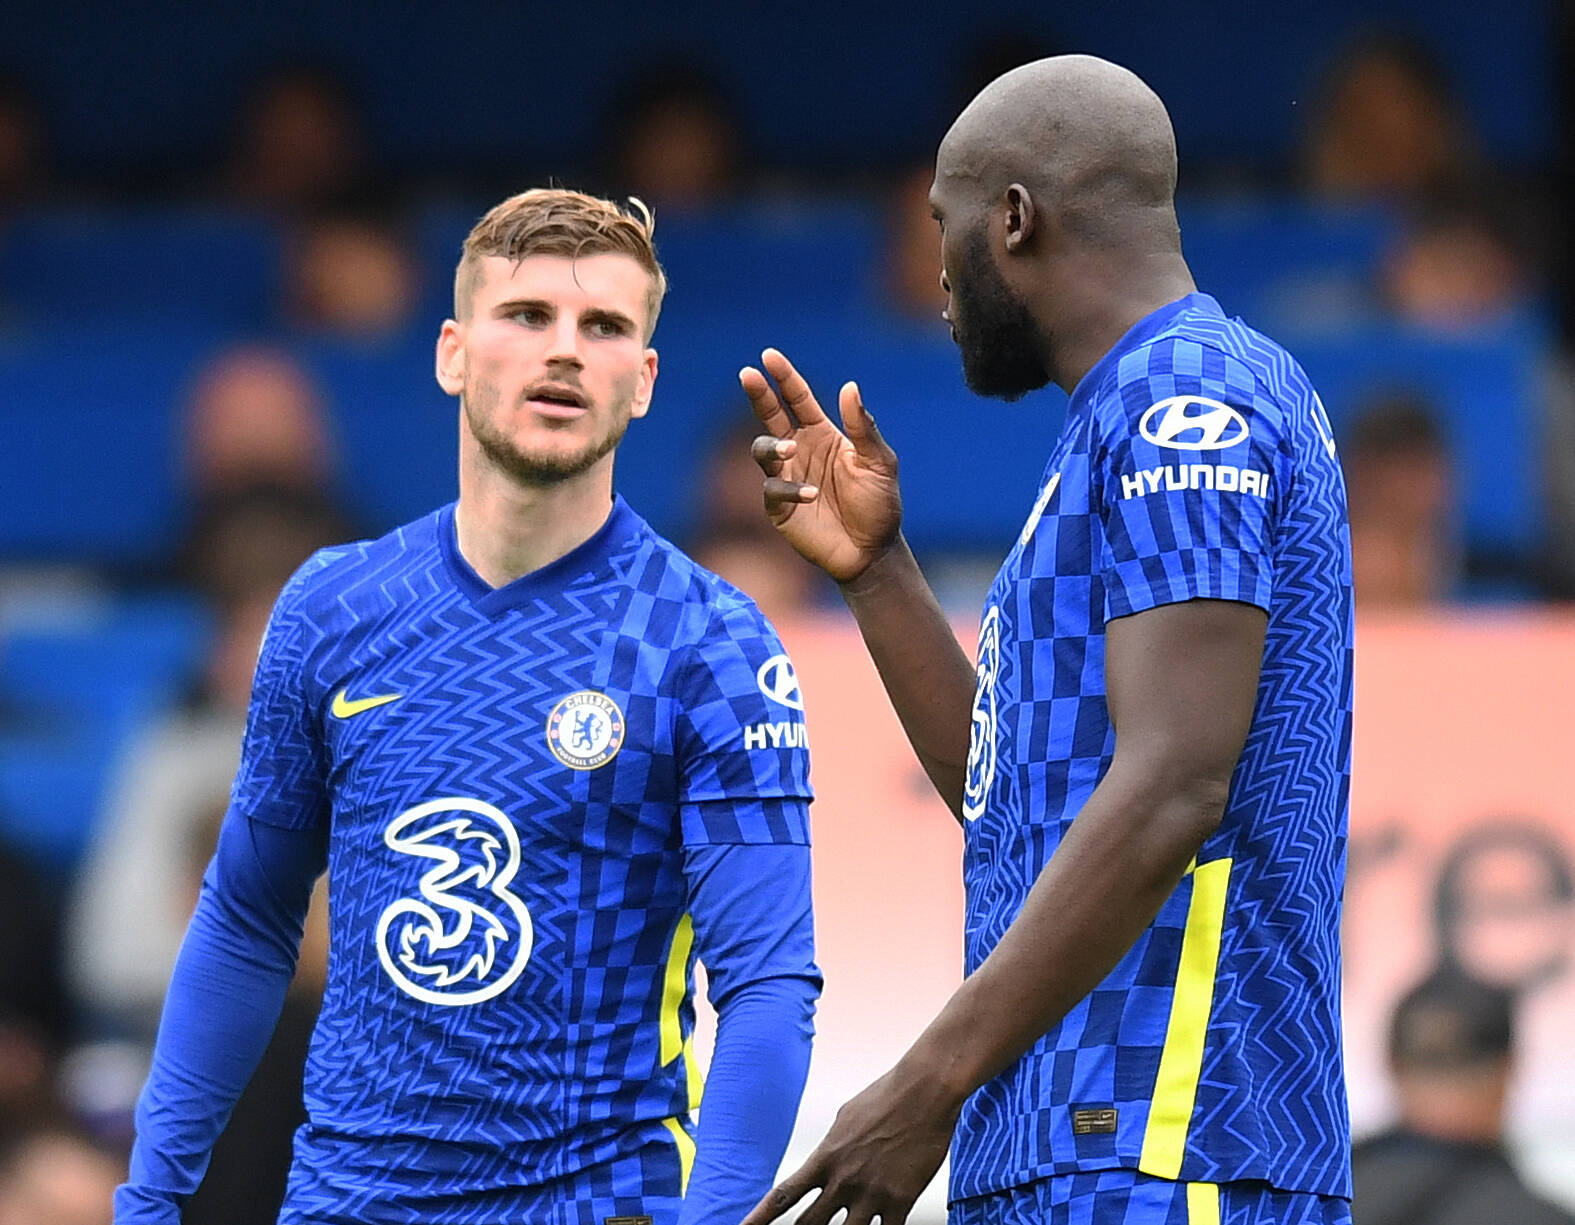 Werner and Lukaku are scoring again - Was Chelsea the problem?